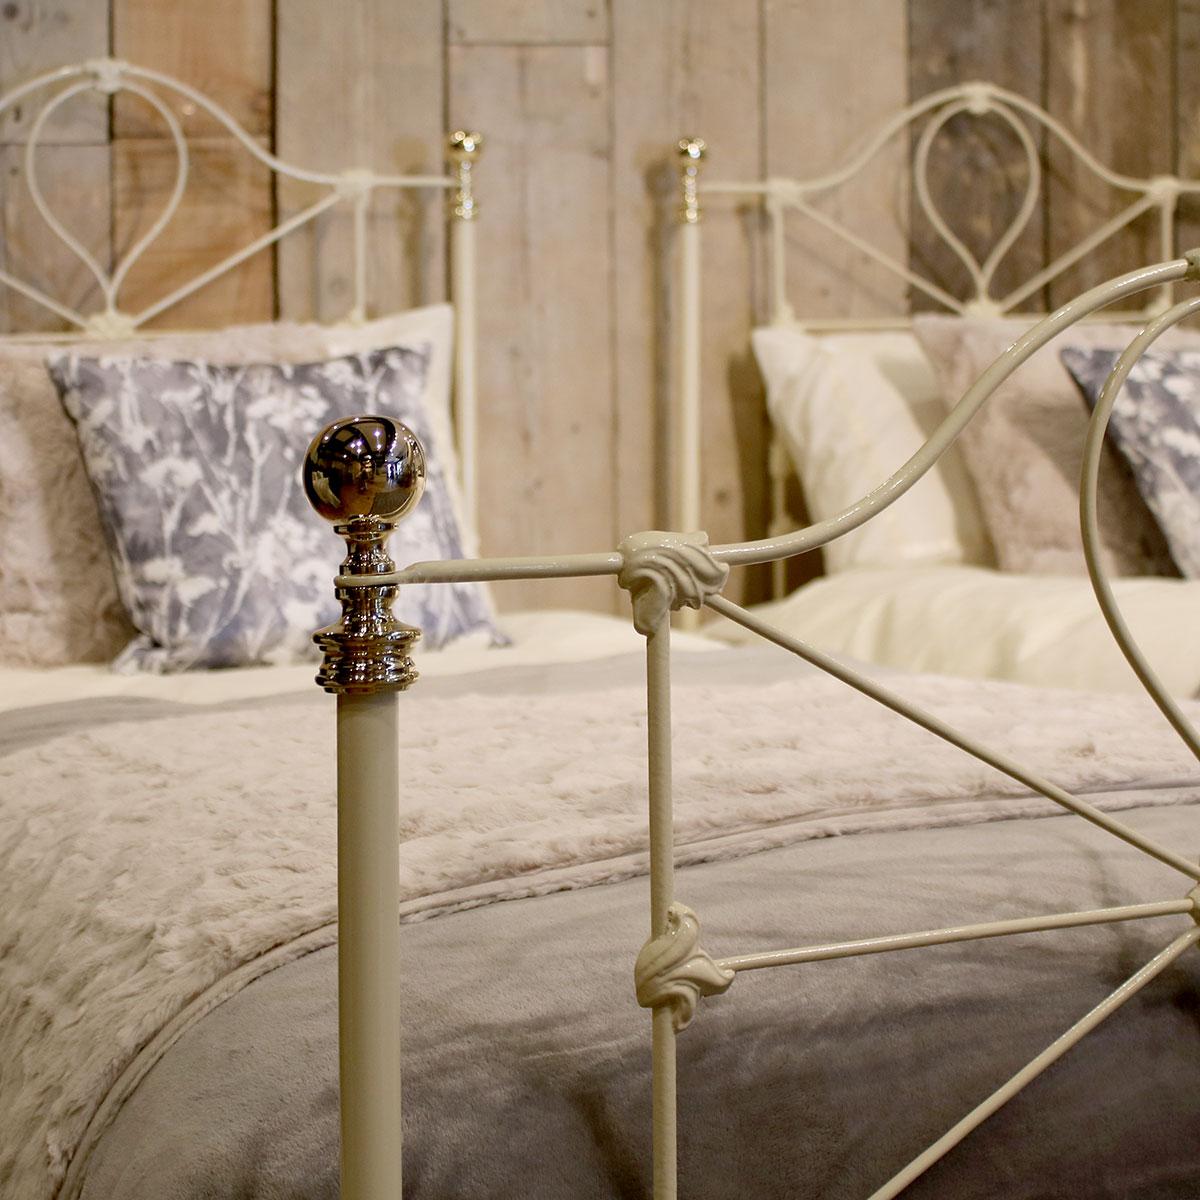 A matching pair of brass and iron antique beds finished in cream.

These beds accept 3ft wide (36 inch or 90 cm) bases and mattresses.
The length can be 75 inches, 78 inches or more if required.
These beds can be joined together to form a 6ft wide